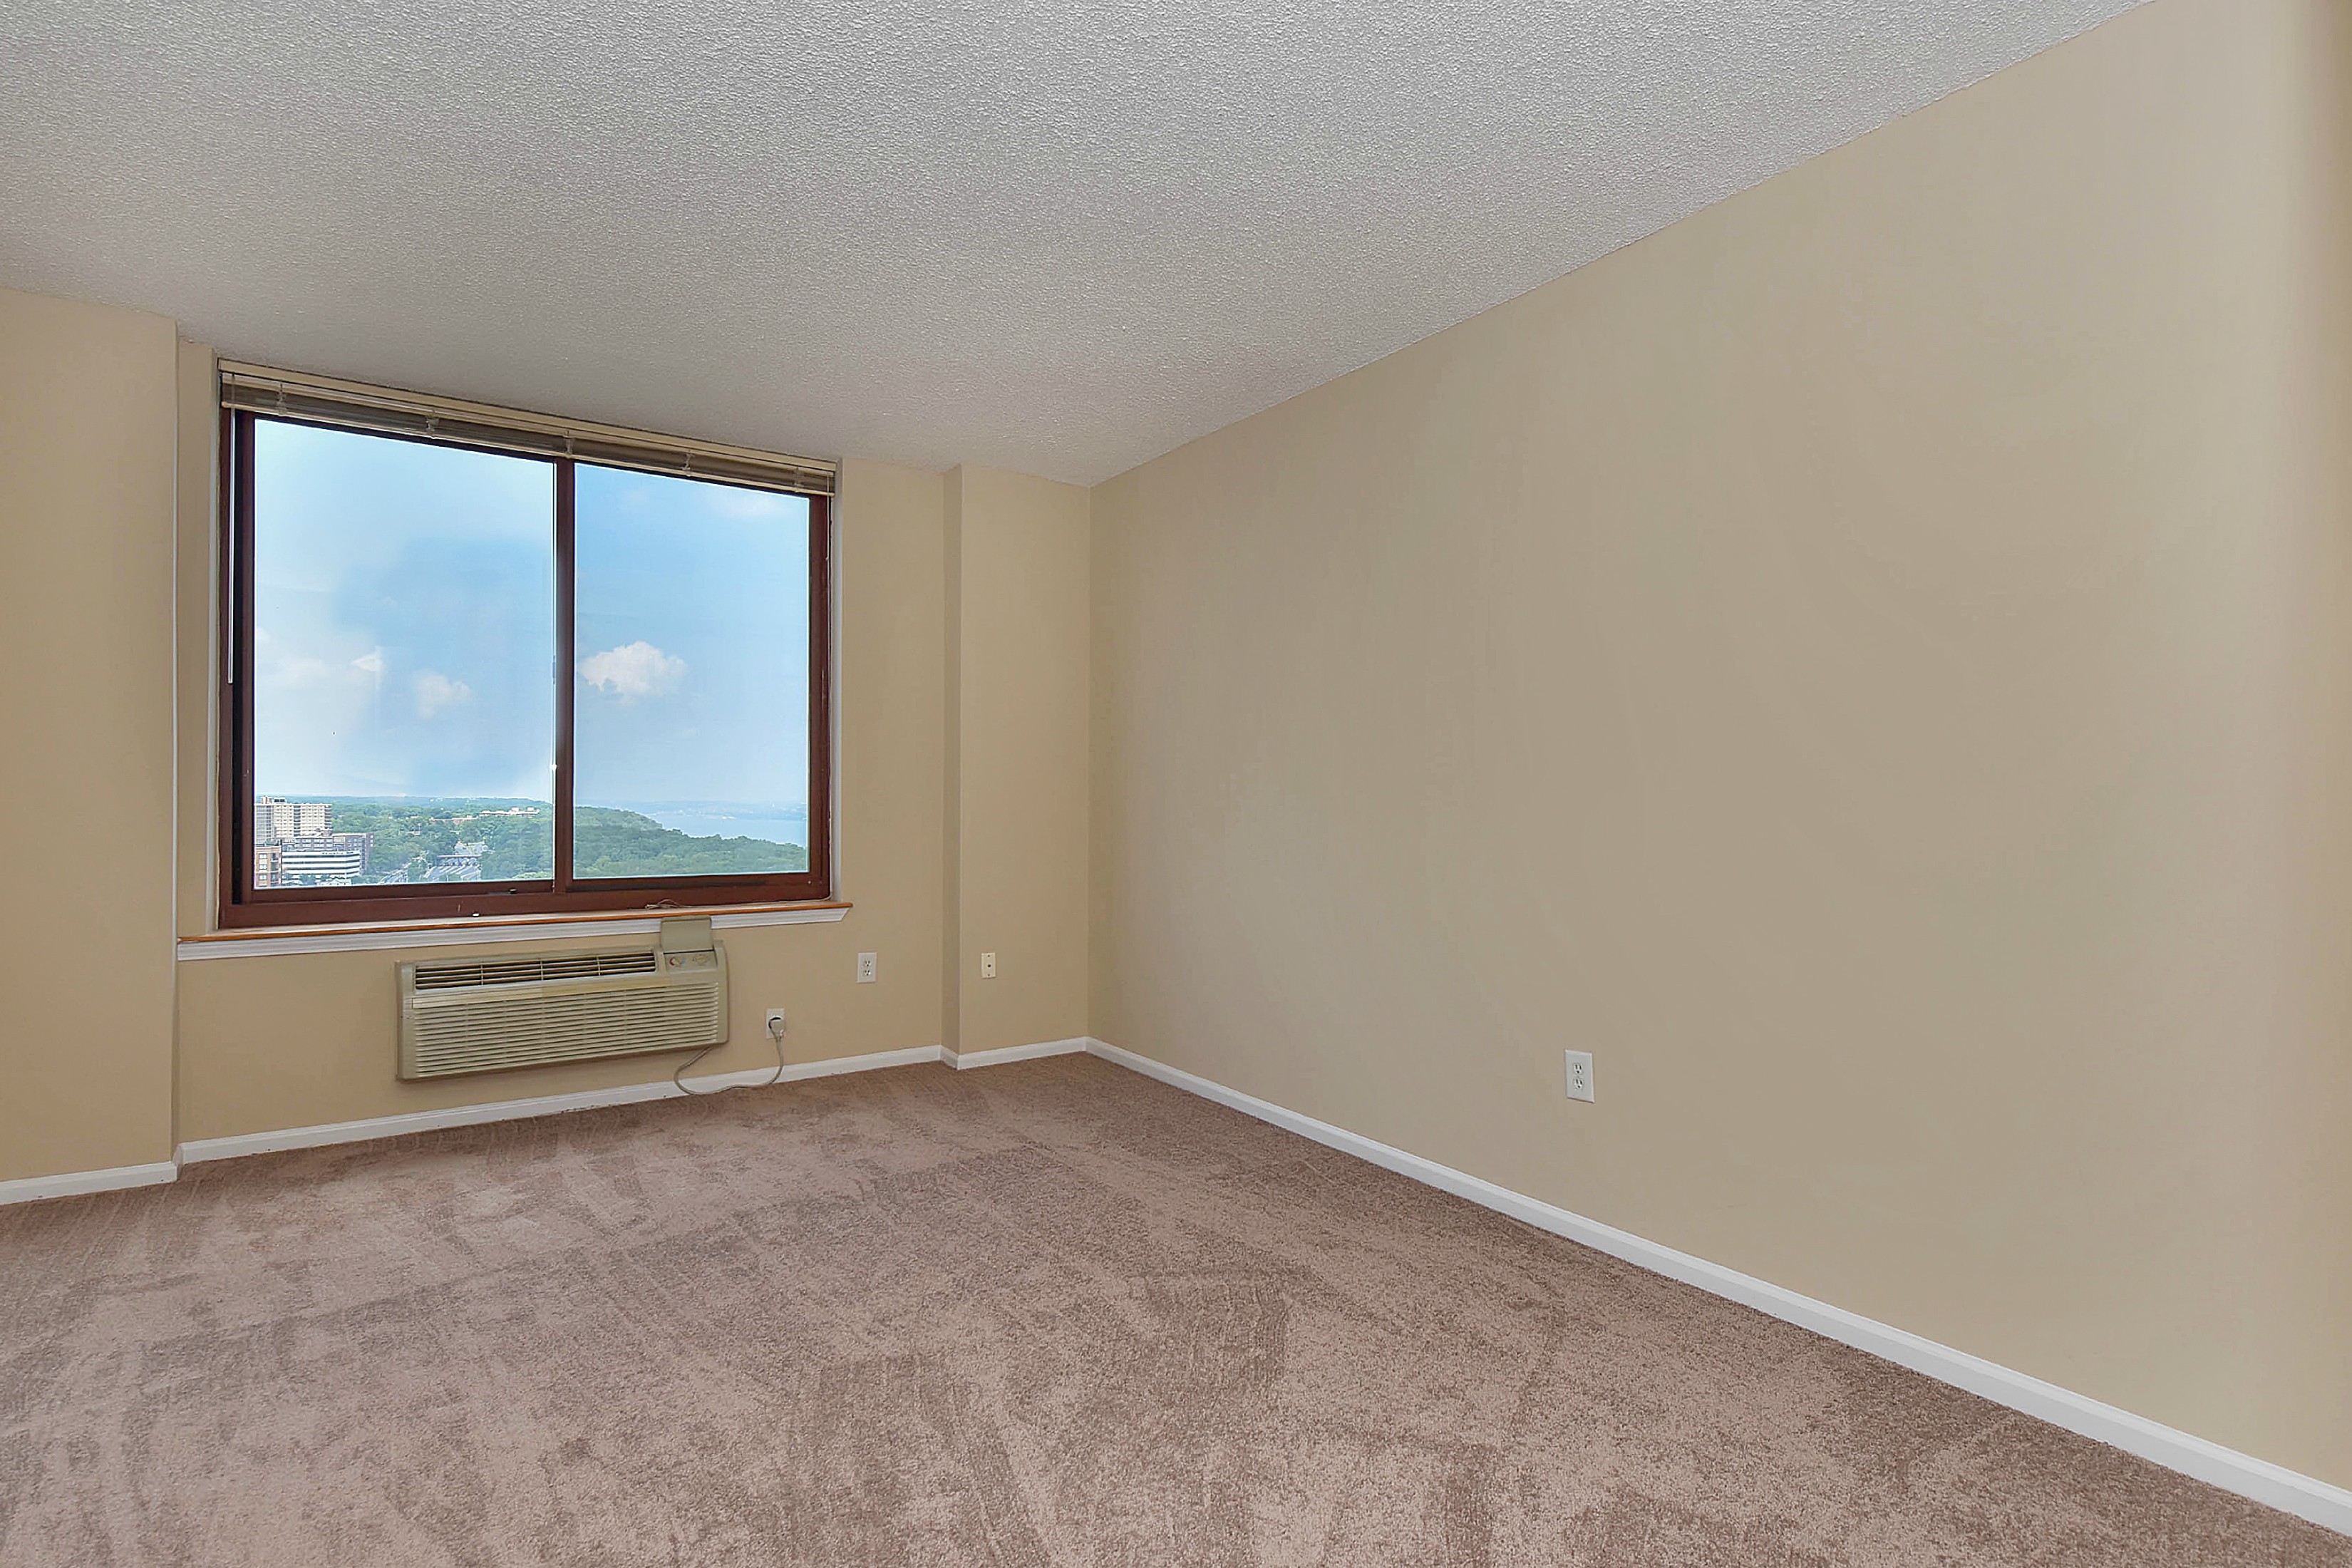 1 old palisade rd 3214 fort lee nj 07024 large room with bay window